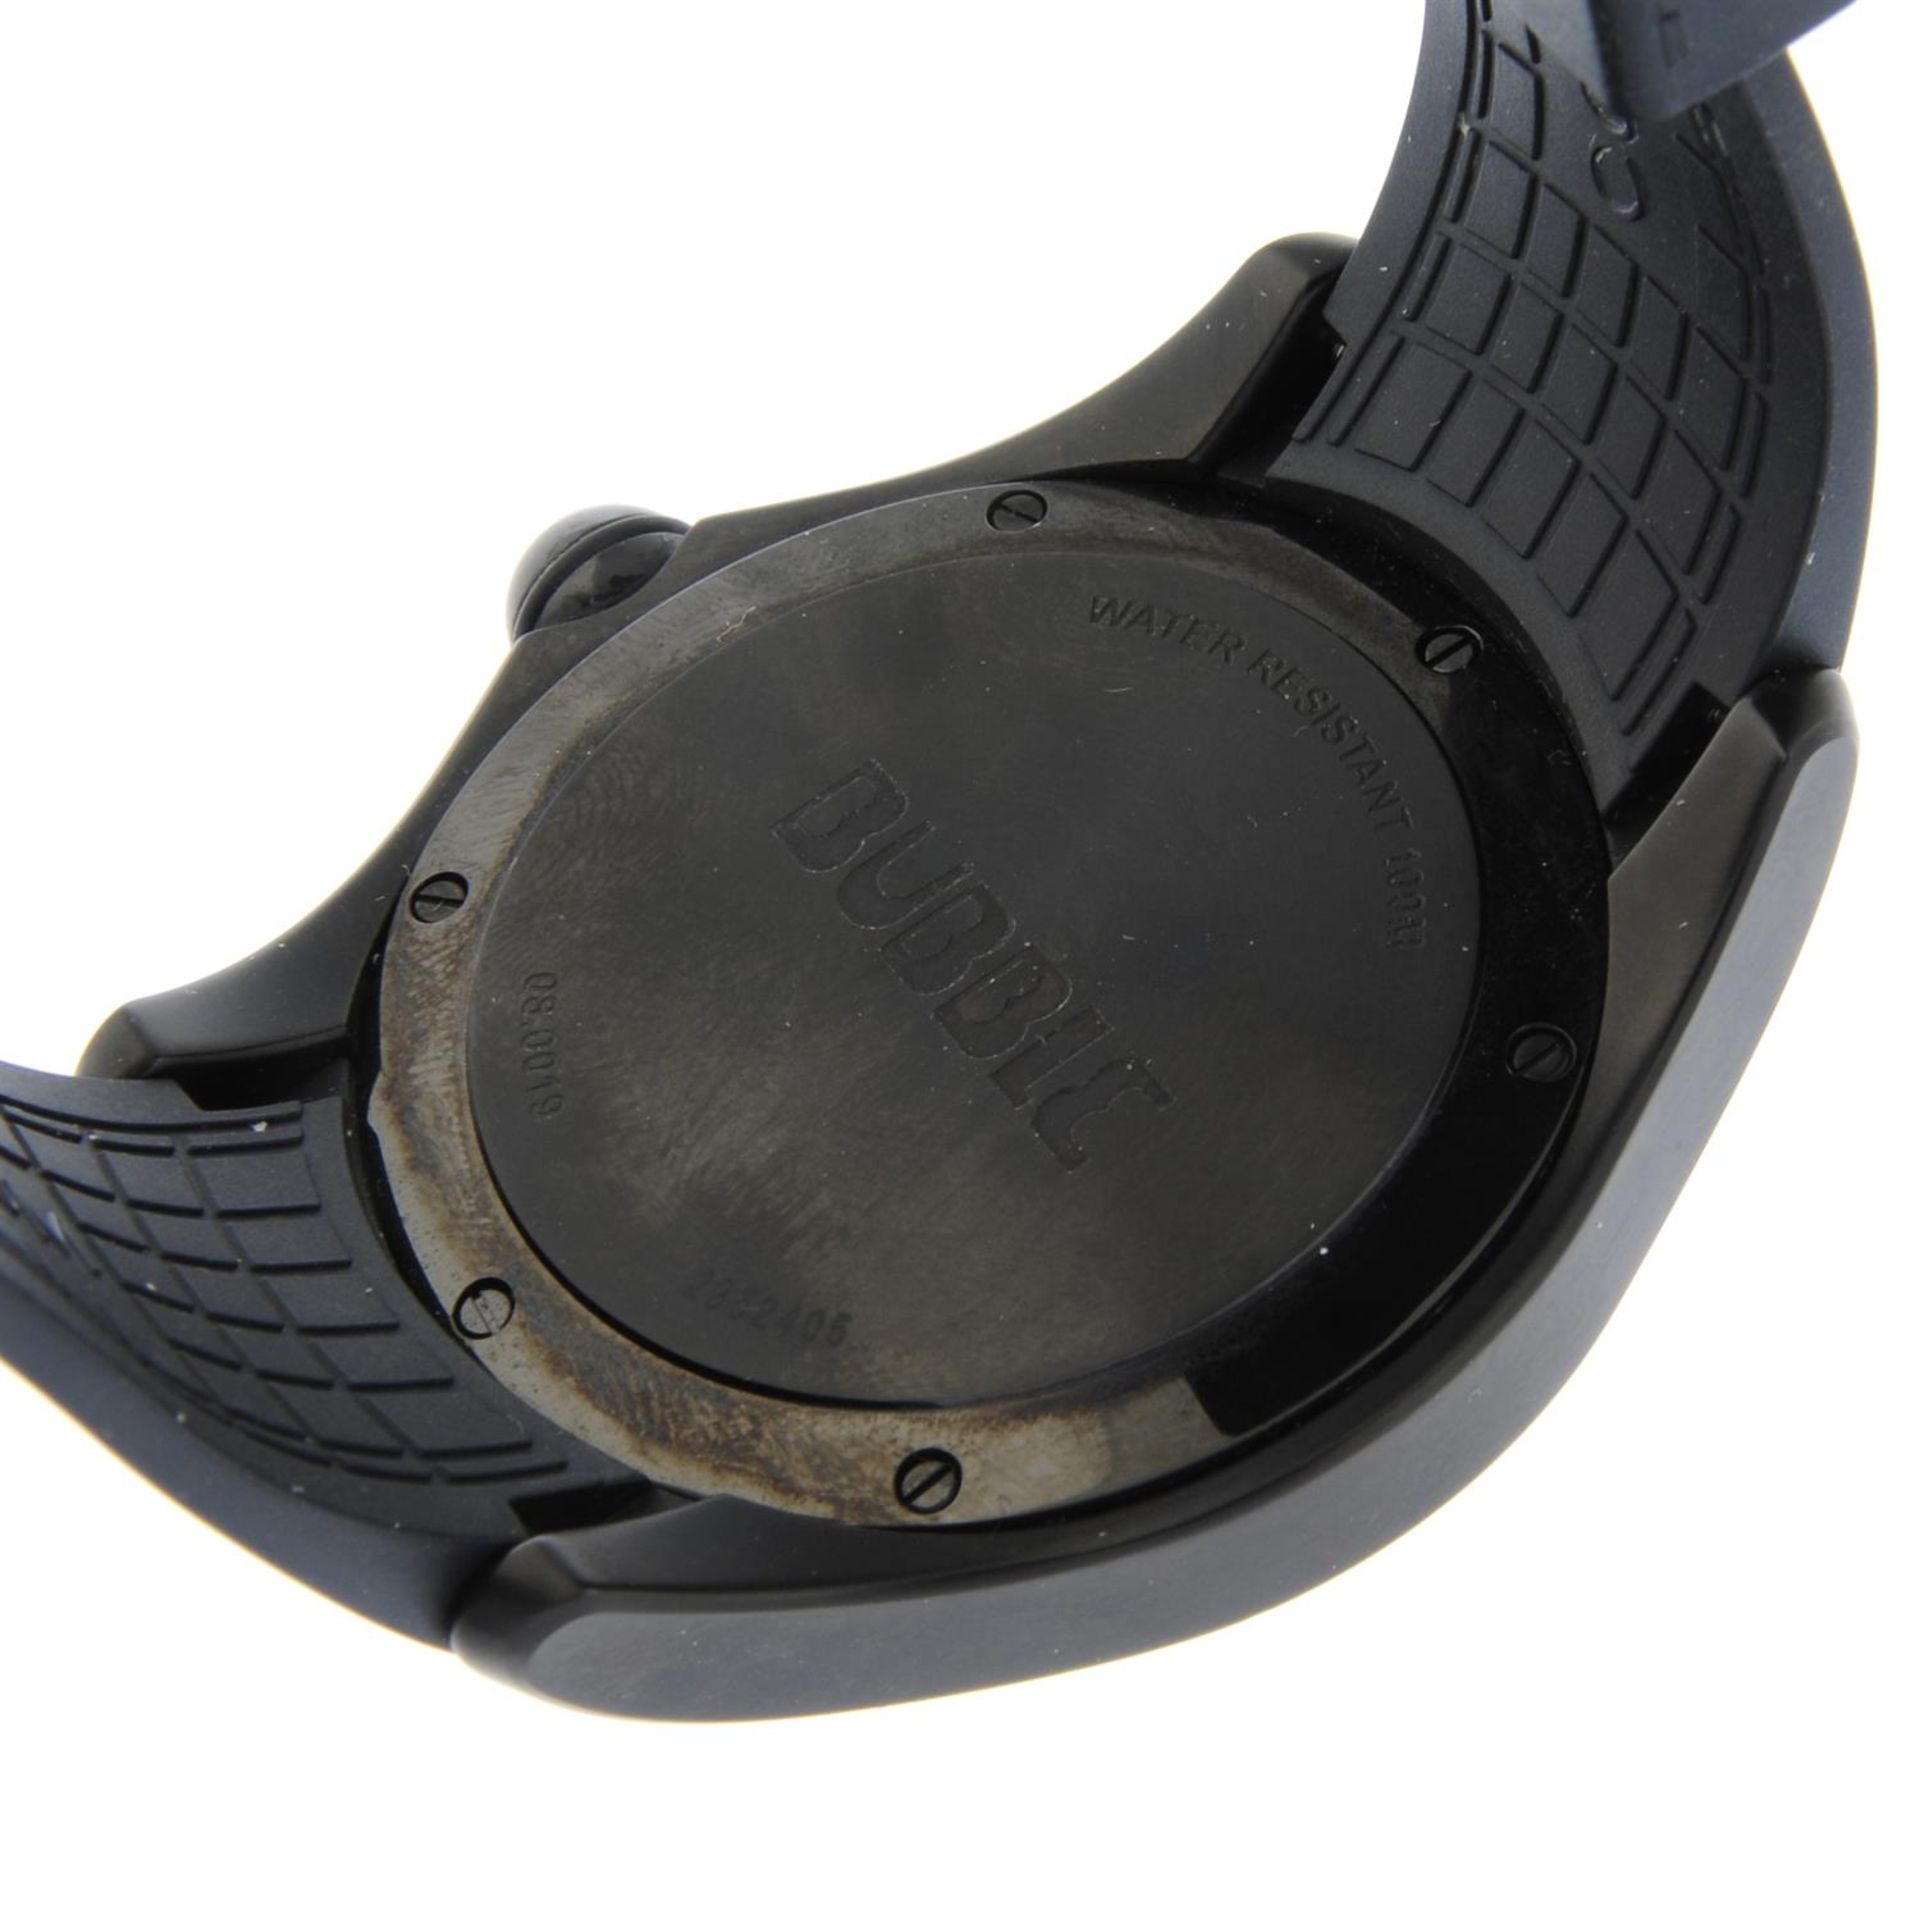 CORUM - a PVD-treated stainless steel Bubble 47 Disconnected wrist watch, 47mm. - Image 4 of 6